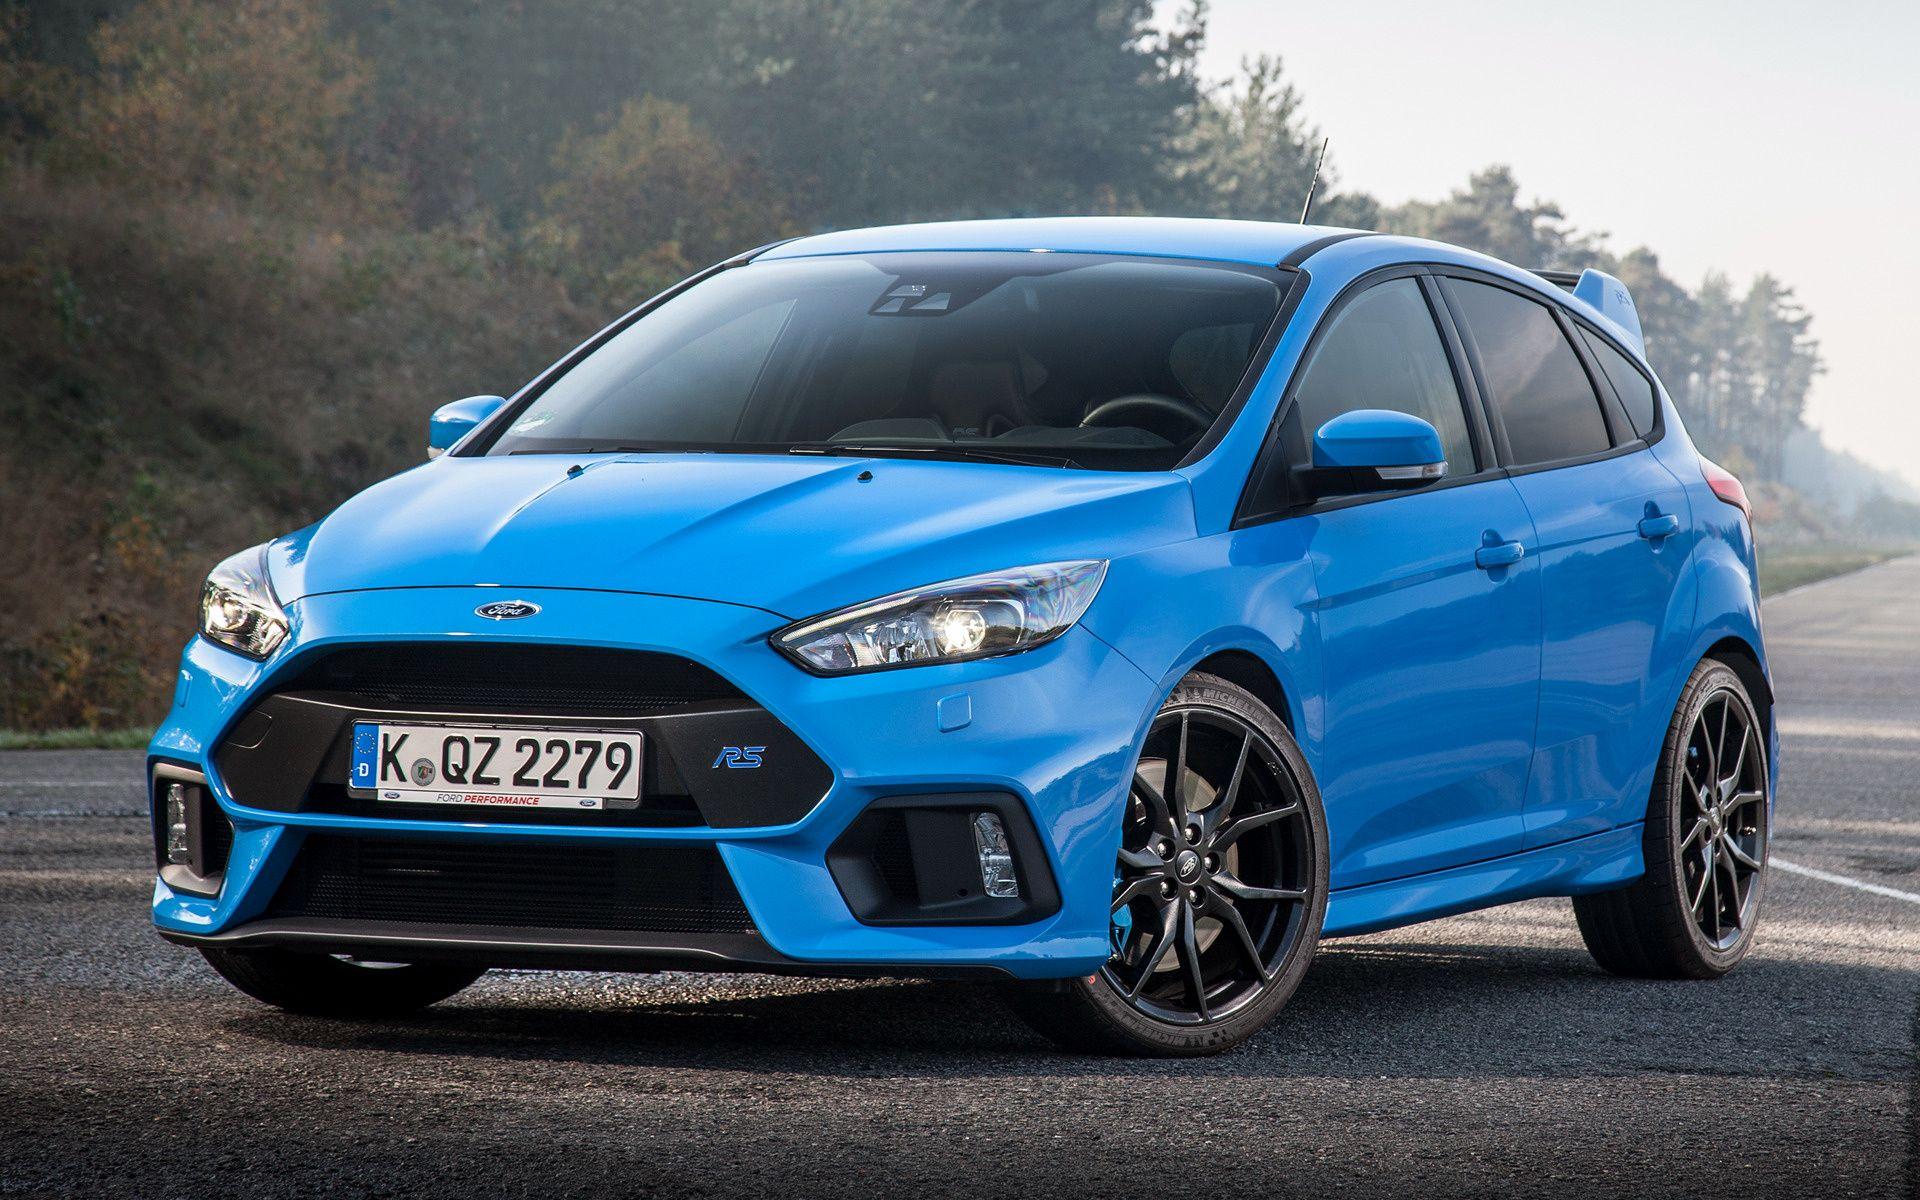 Focus Rs Wallpapers Top Free Focus Rs Backgrounds Wallpaperaccess